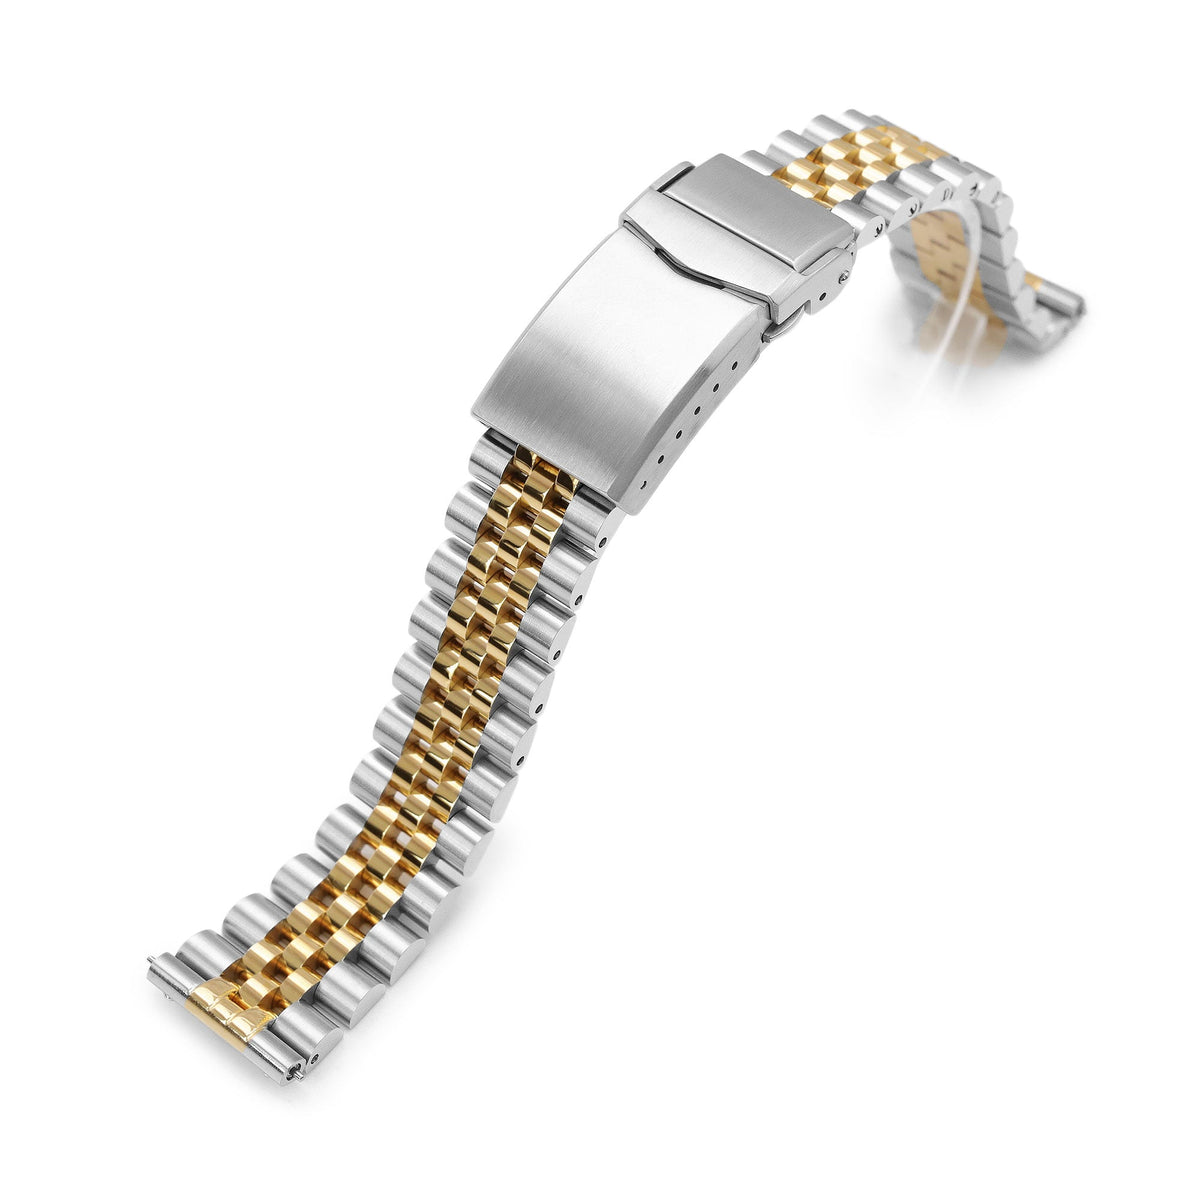 18mm or 19mm Super-JUB II QR Watch Band Straight End Quick Release, 316L Stainless Steel Two Tone IP Gold V-Clasp Strapcode Watch Bands